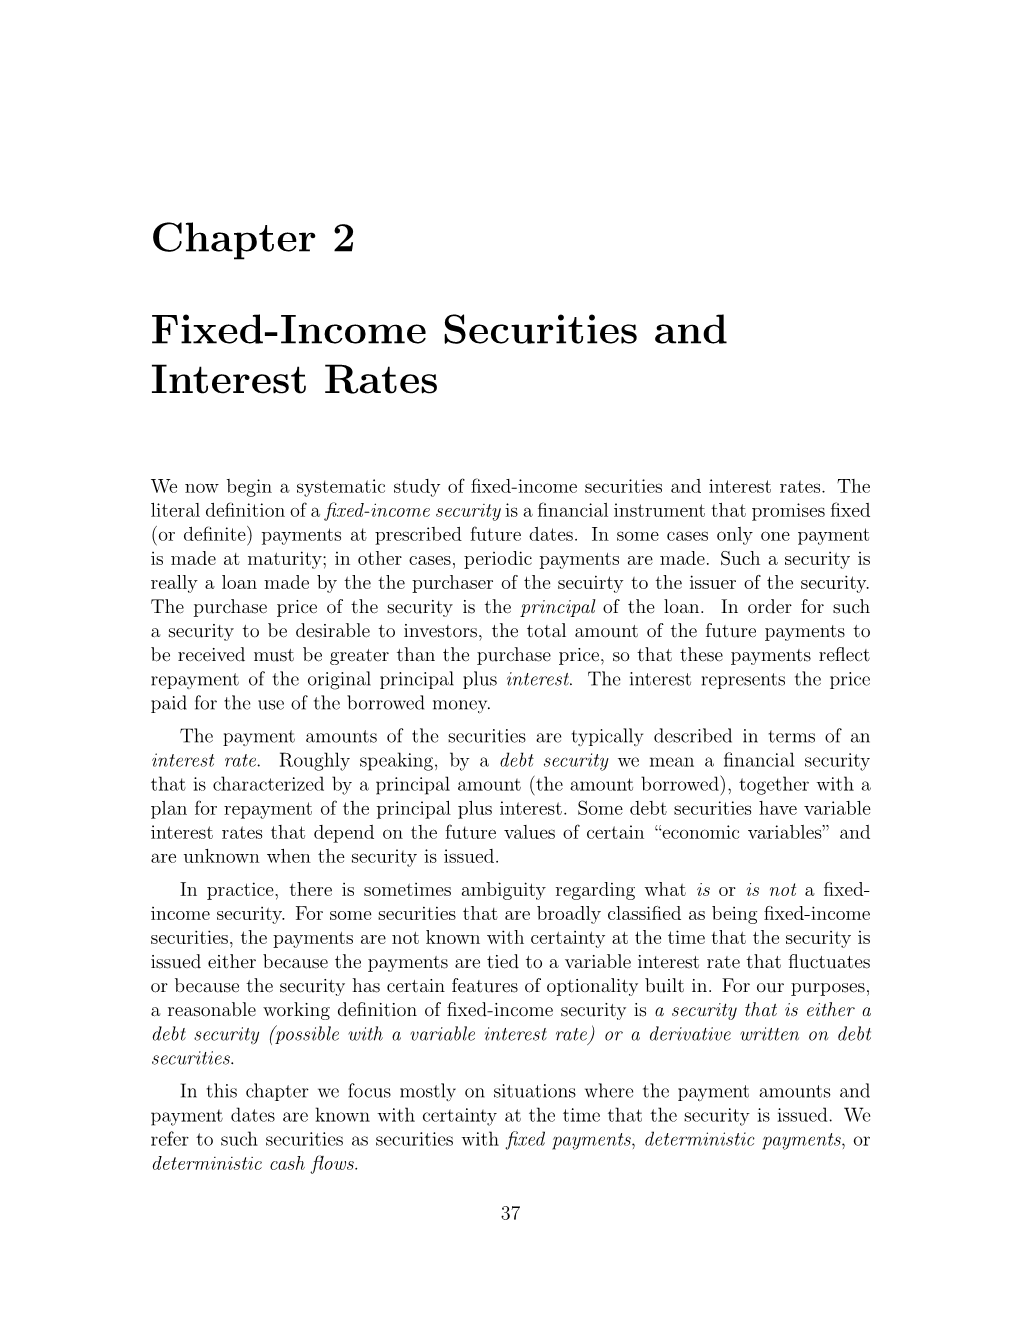 Chapter 2 Fixed-Income Securities and Interest Rates